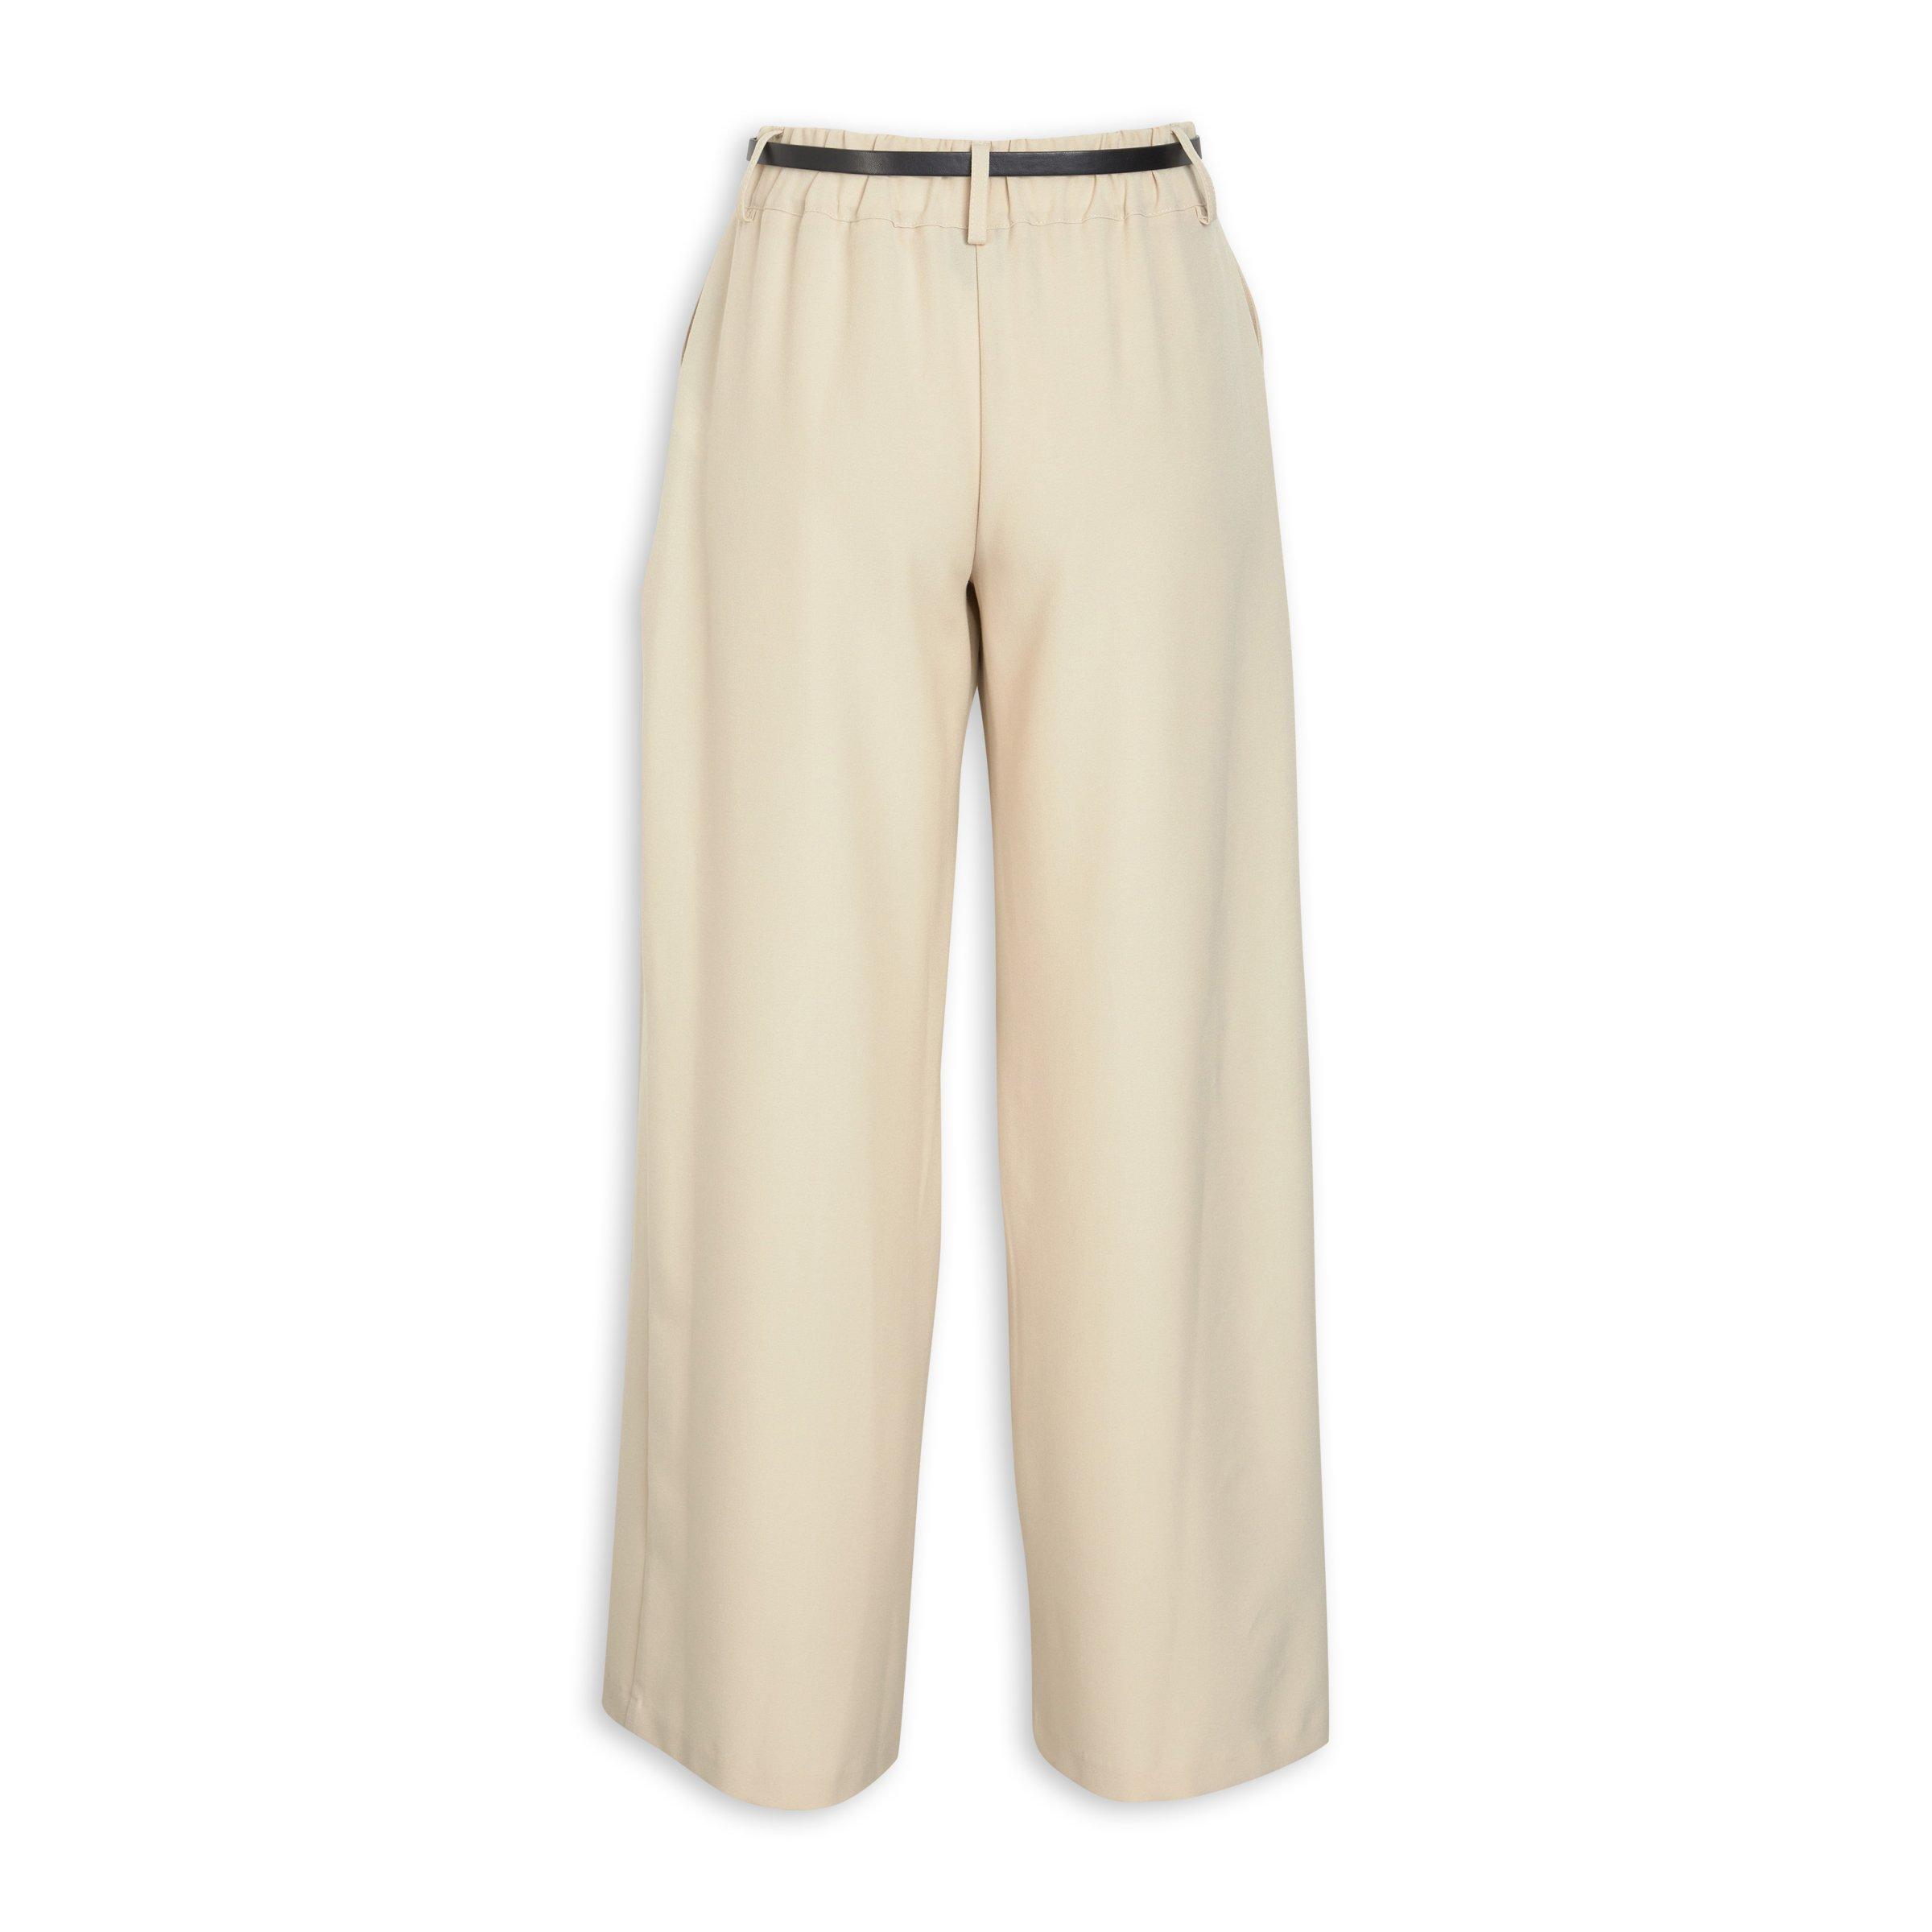 Stone Belted Wide Leg Pants (3132100)